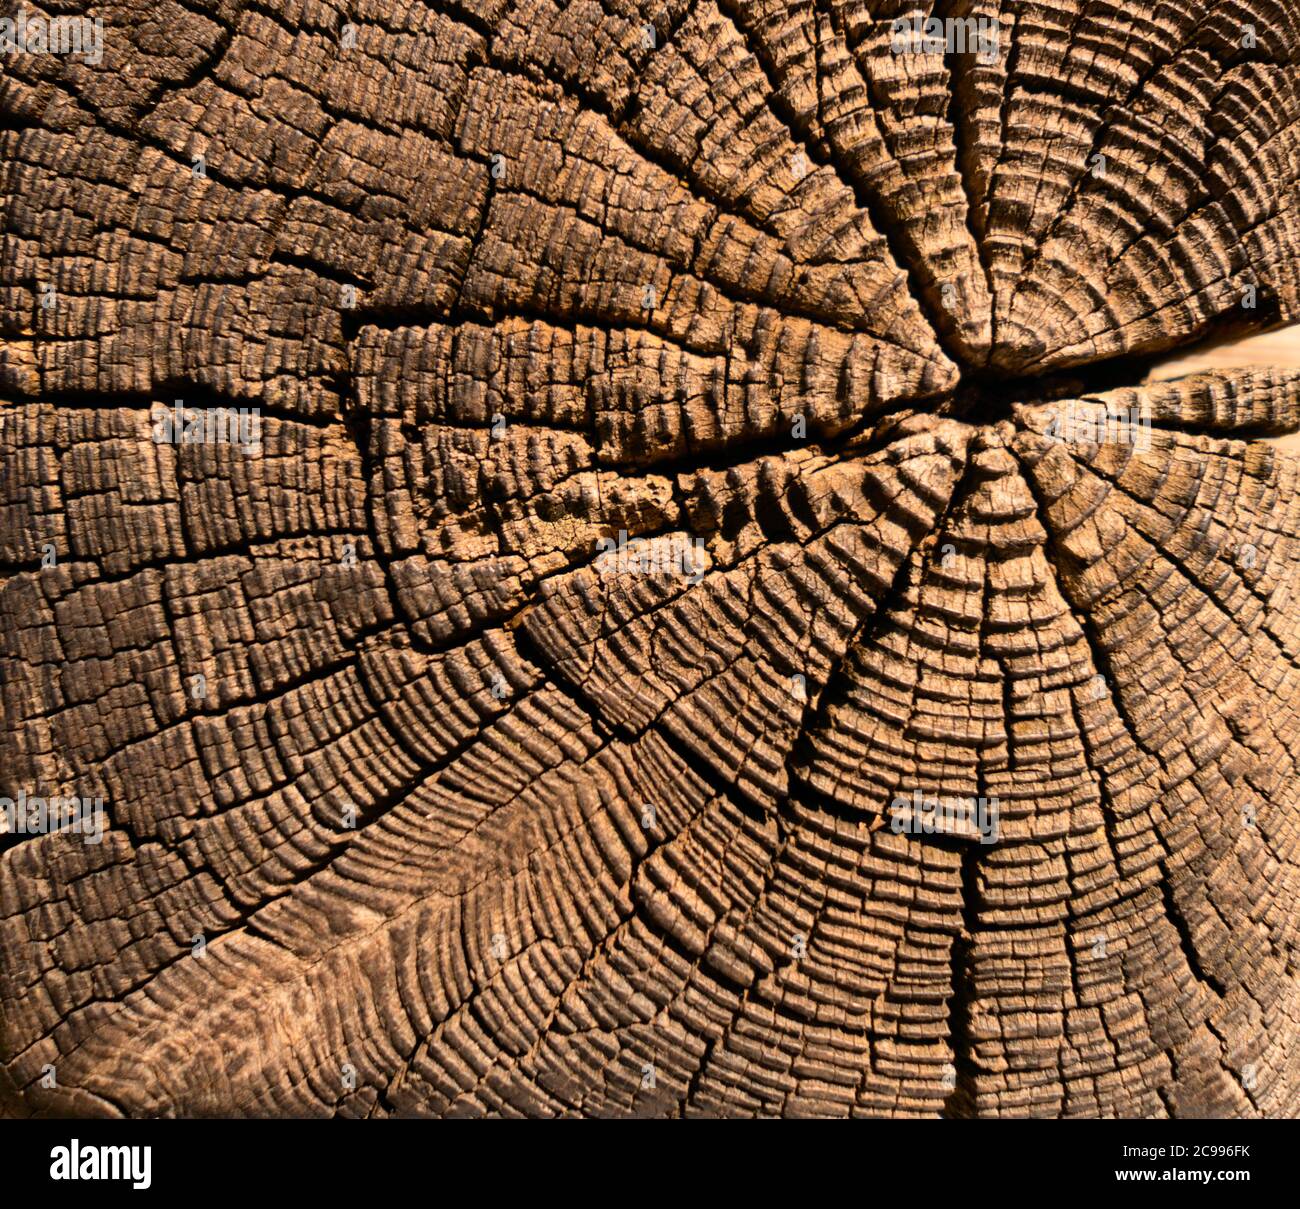 Annual Wood Circles - Pieces Of Wood With Annual Rings Stock Photo, Picture  and Royalty Free Image. Image 6331071.